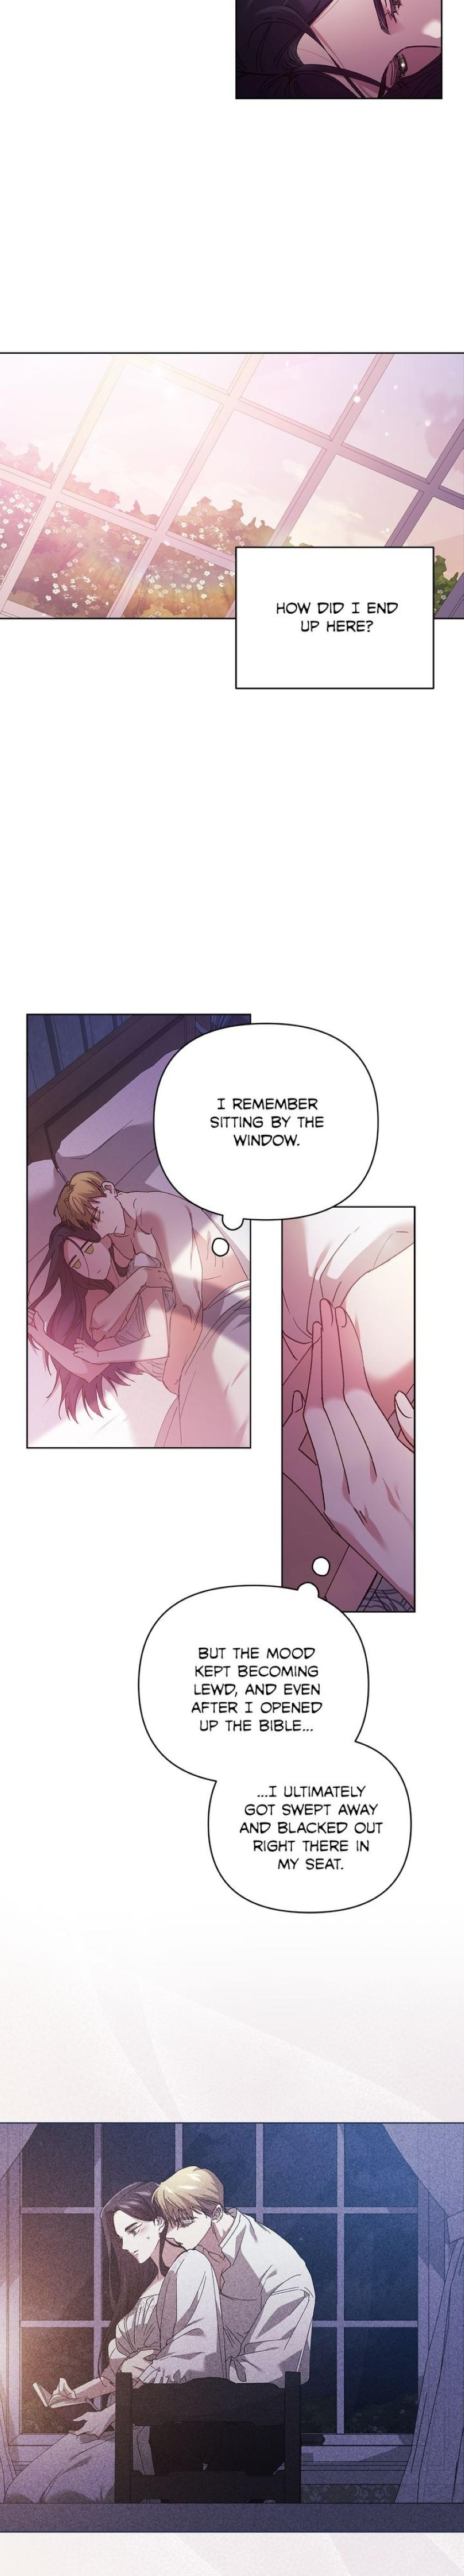 The broken Ring this marriage will fail anyway Manga. Манхва broken Ring this marriage. Manhwa broken Ring. This marriage is bound to fail anyway manhwa. This marriage will fail